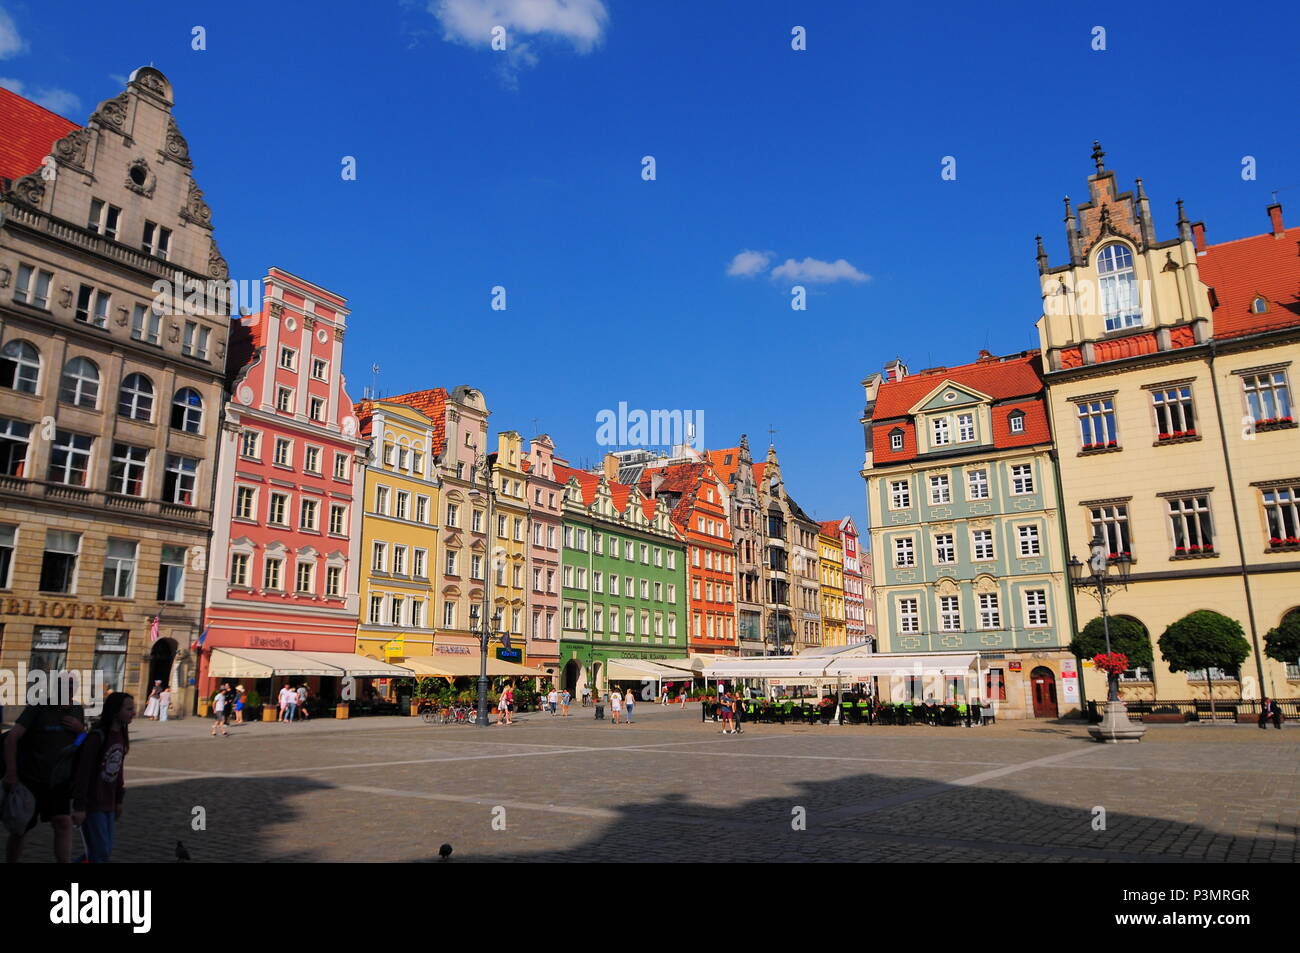 Poland, city of Wroclaw, houses and people on Old Town Square, Main Market Square. June 2018 Stock Photo